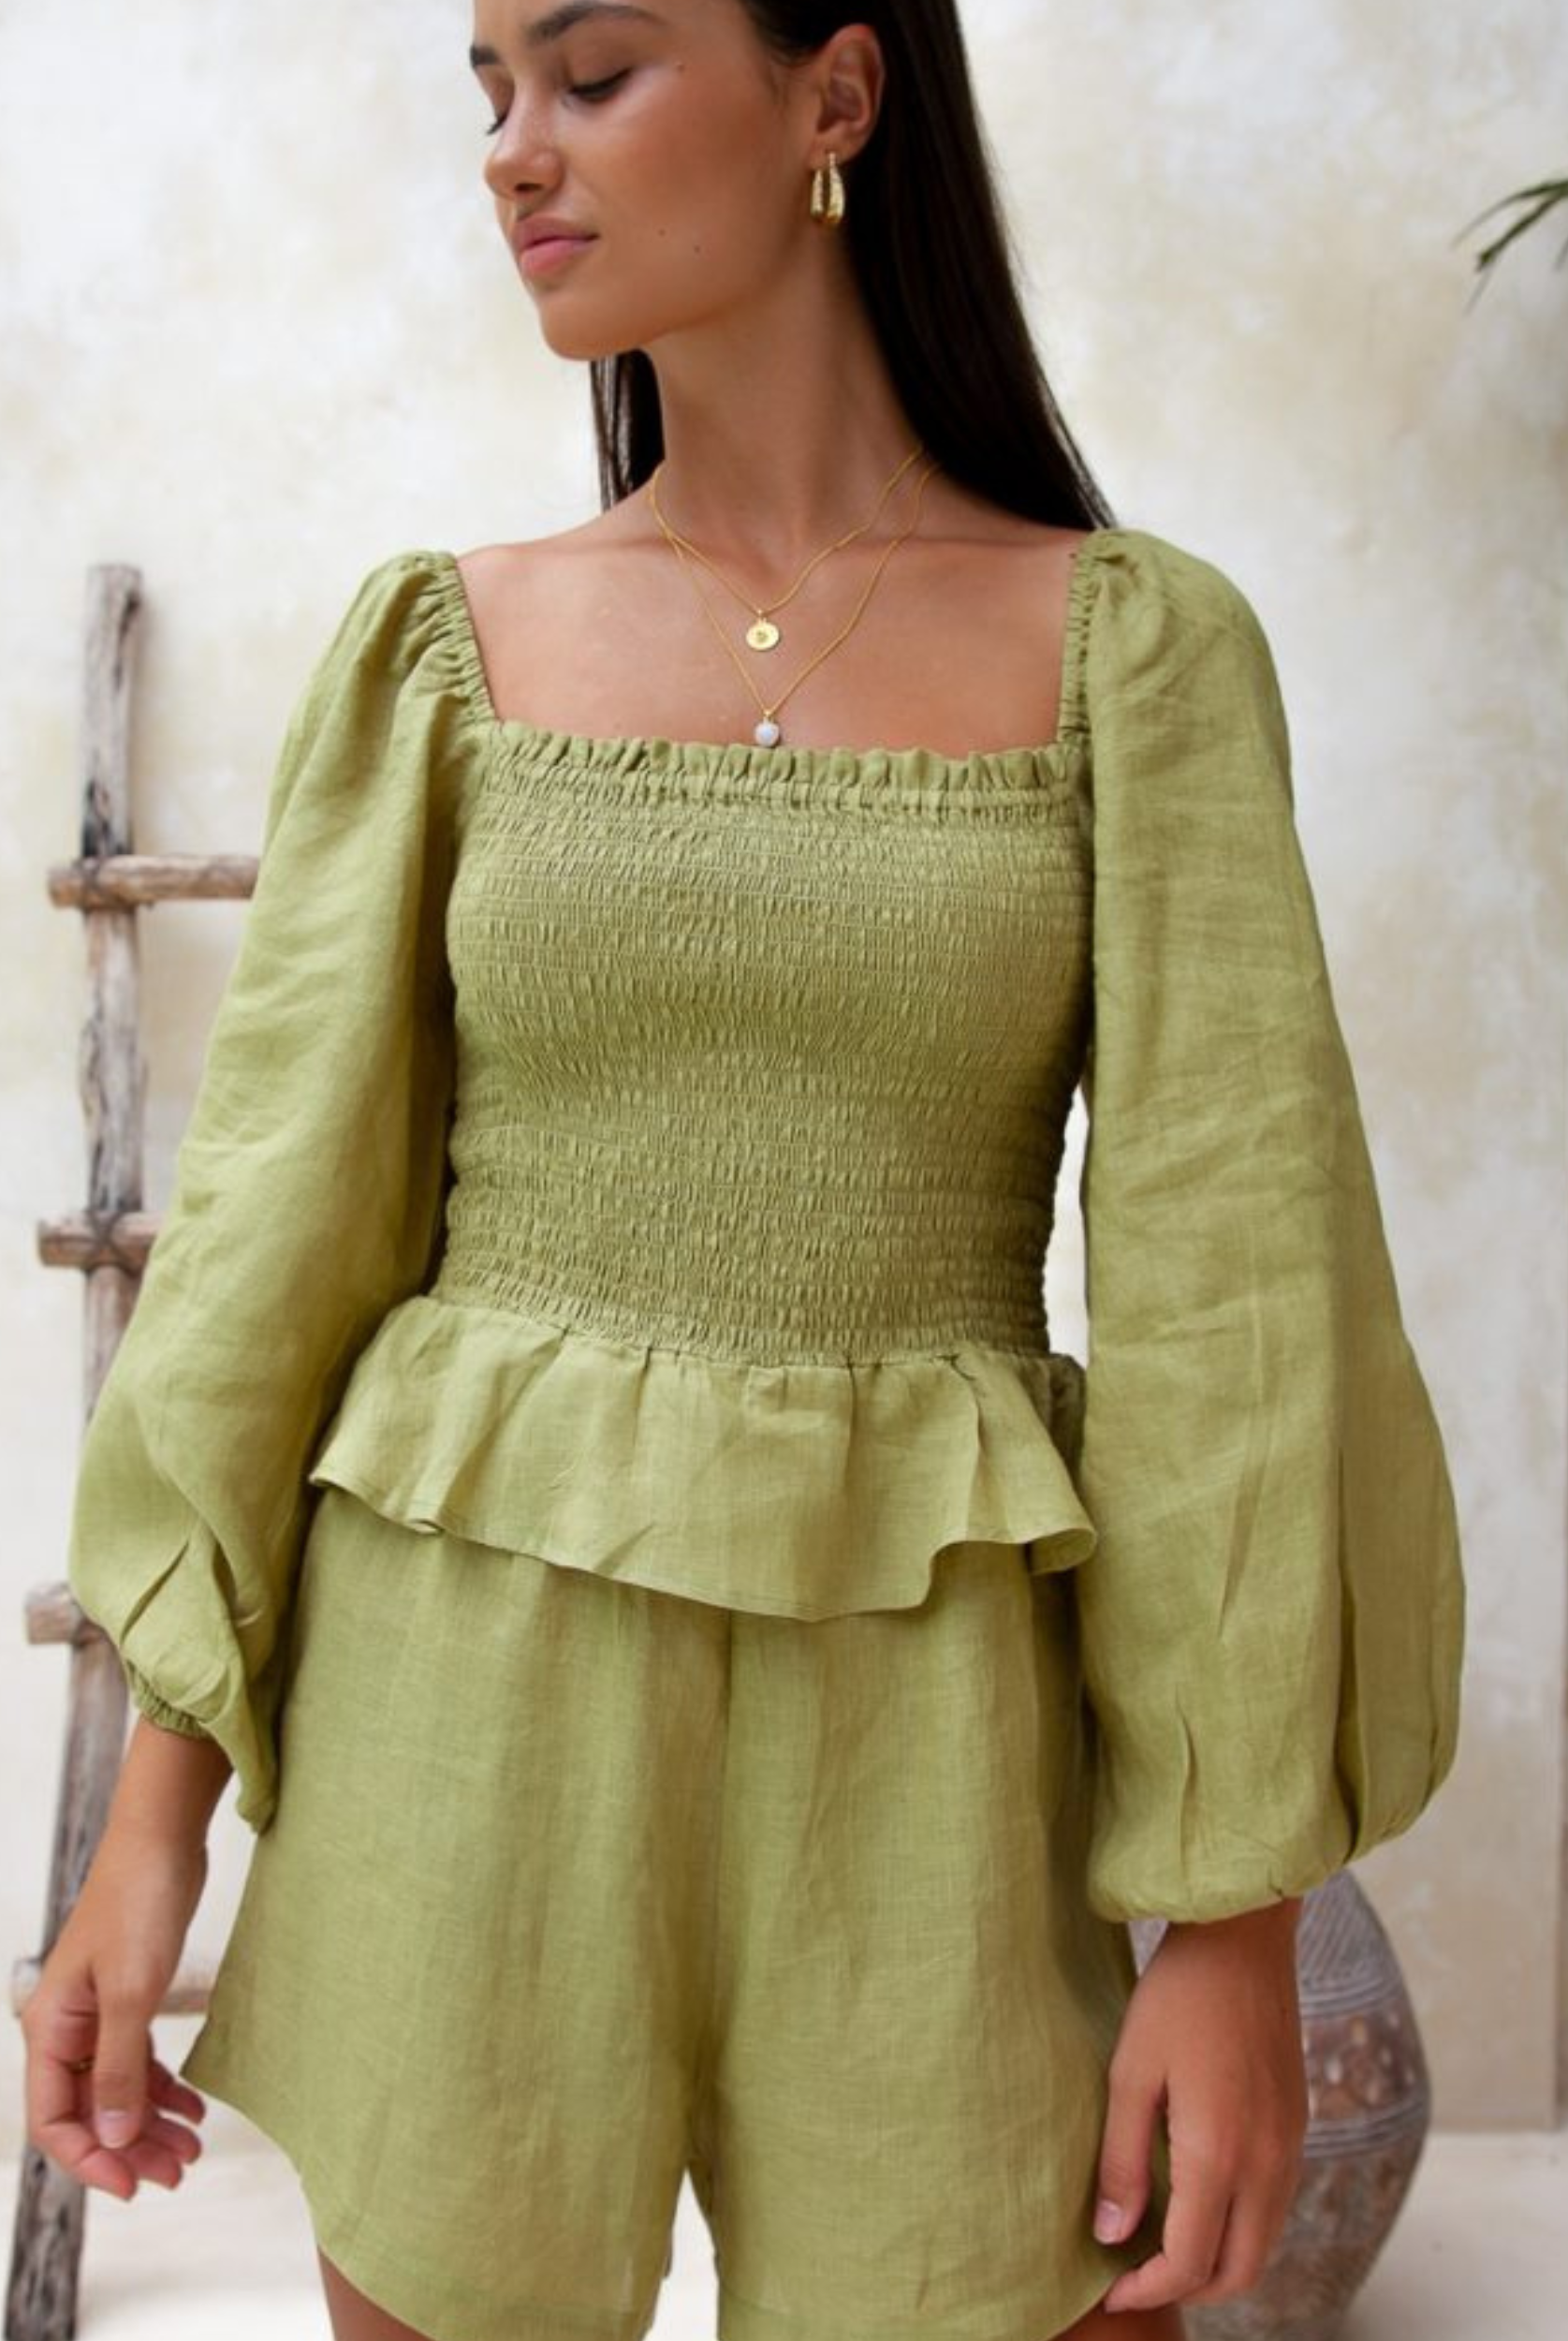 Moss green sustainable linen playsuit from Palm Collective